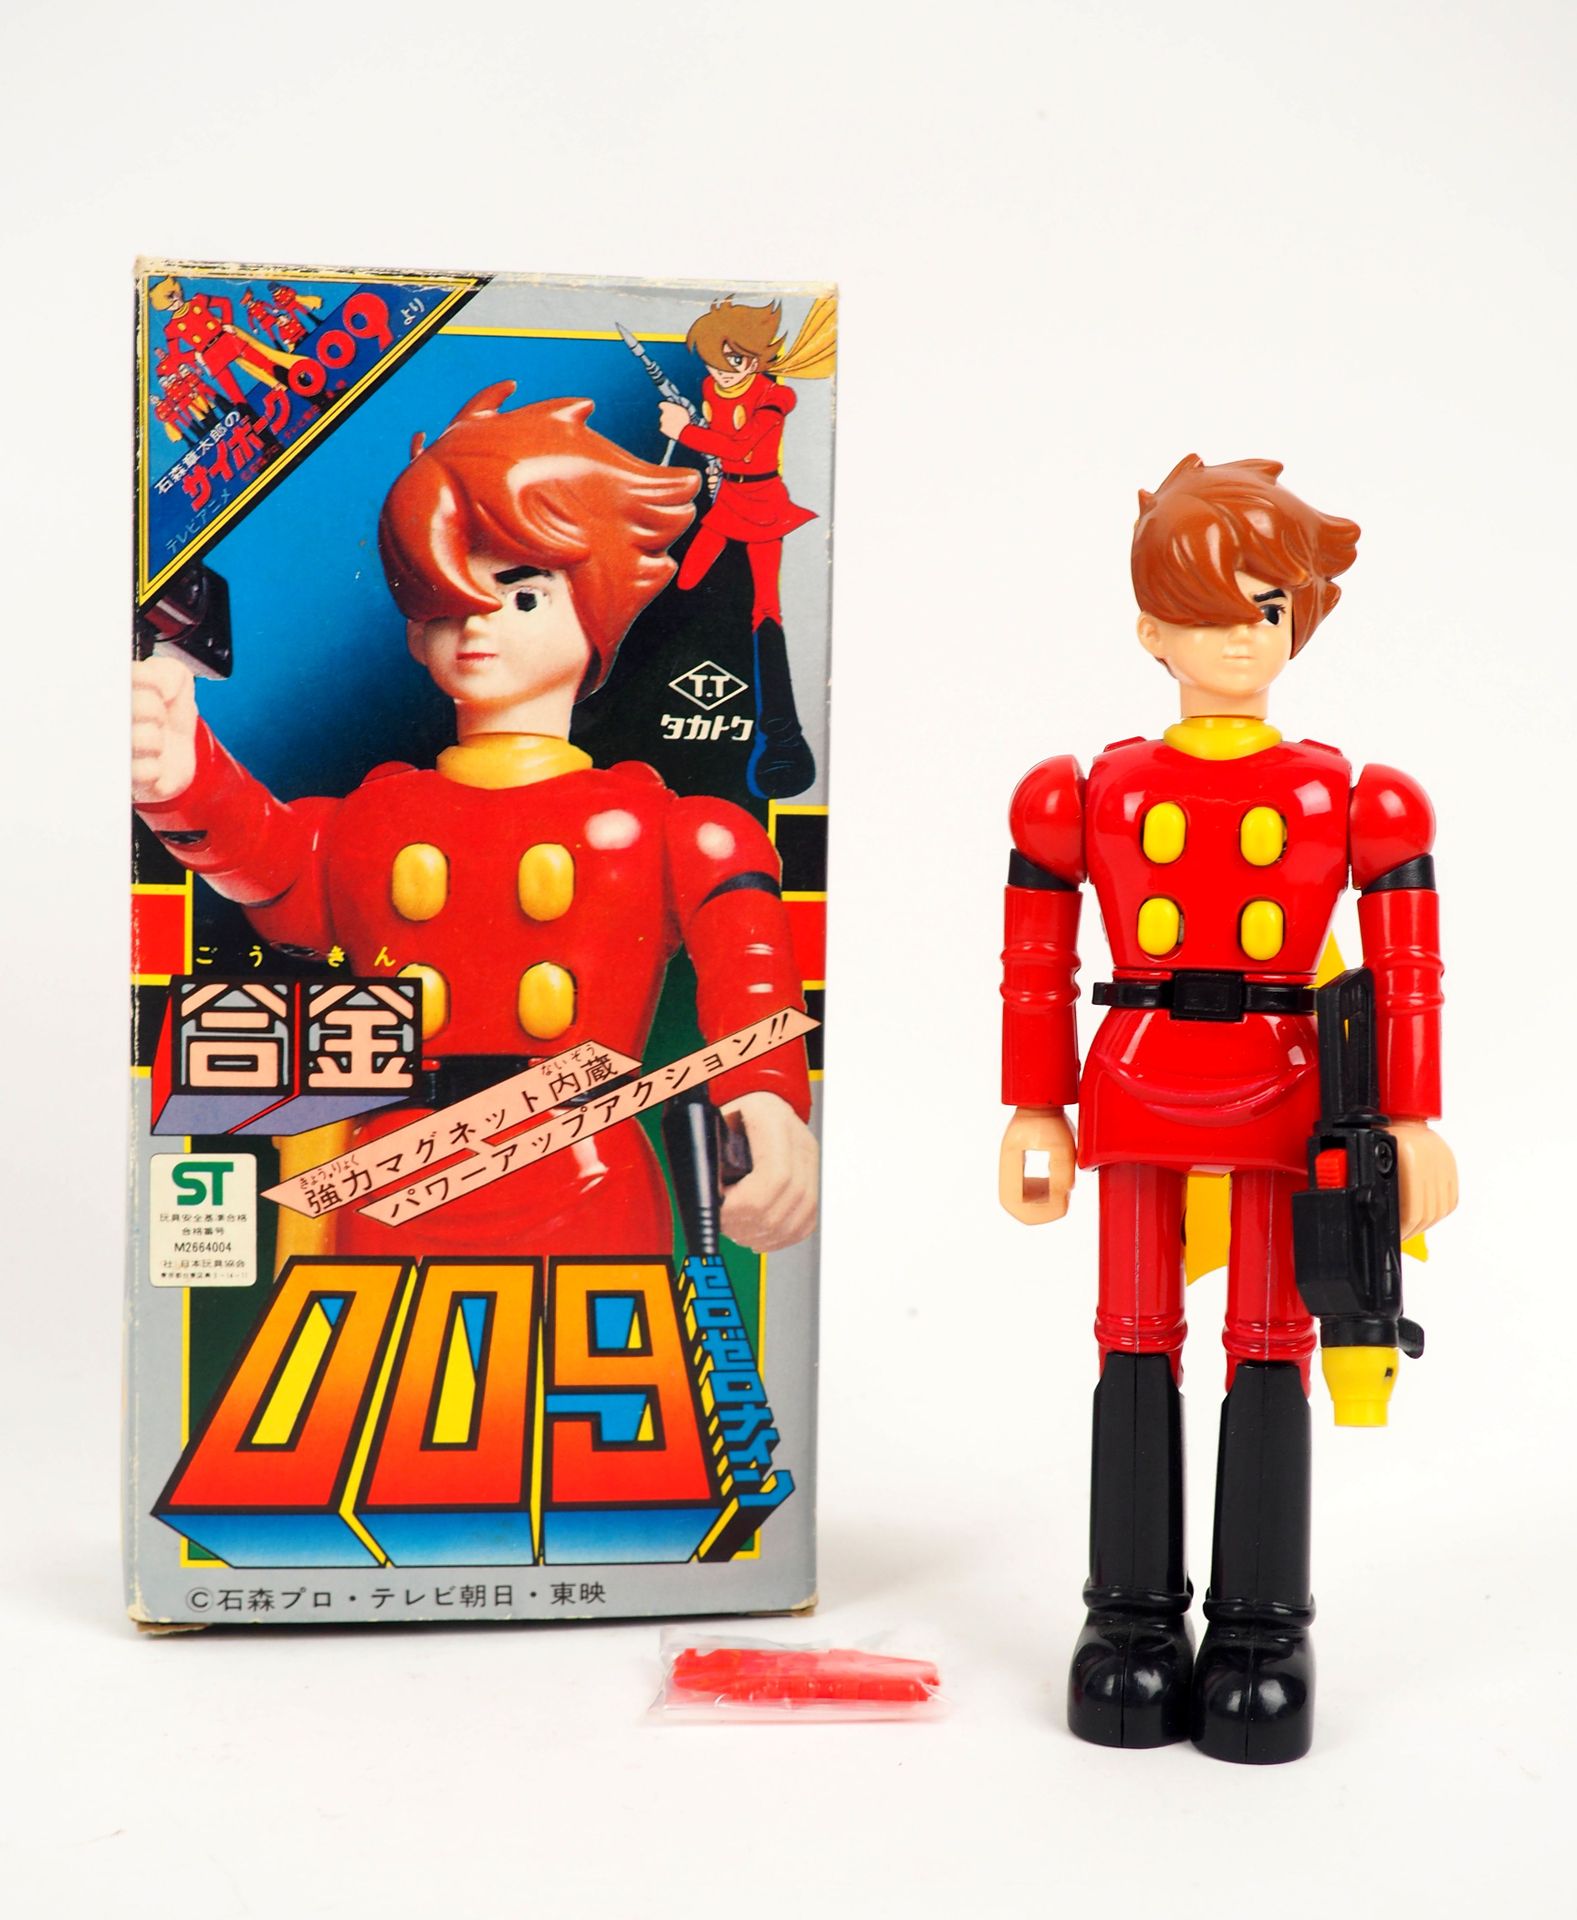 Null JAPAN CYBORG 009
After Shōtarō Ishinomori
Boxed figure, the harness with th&hellip;